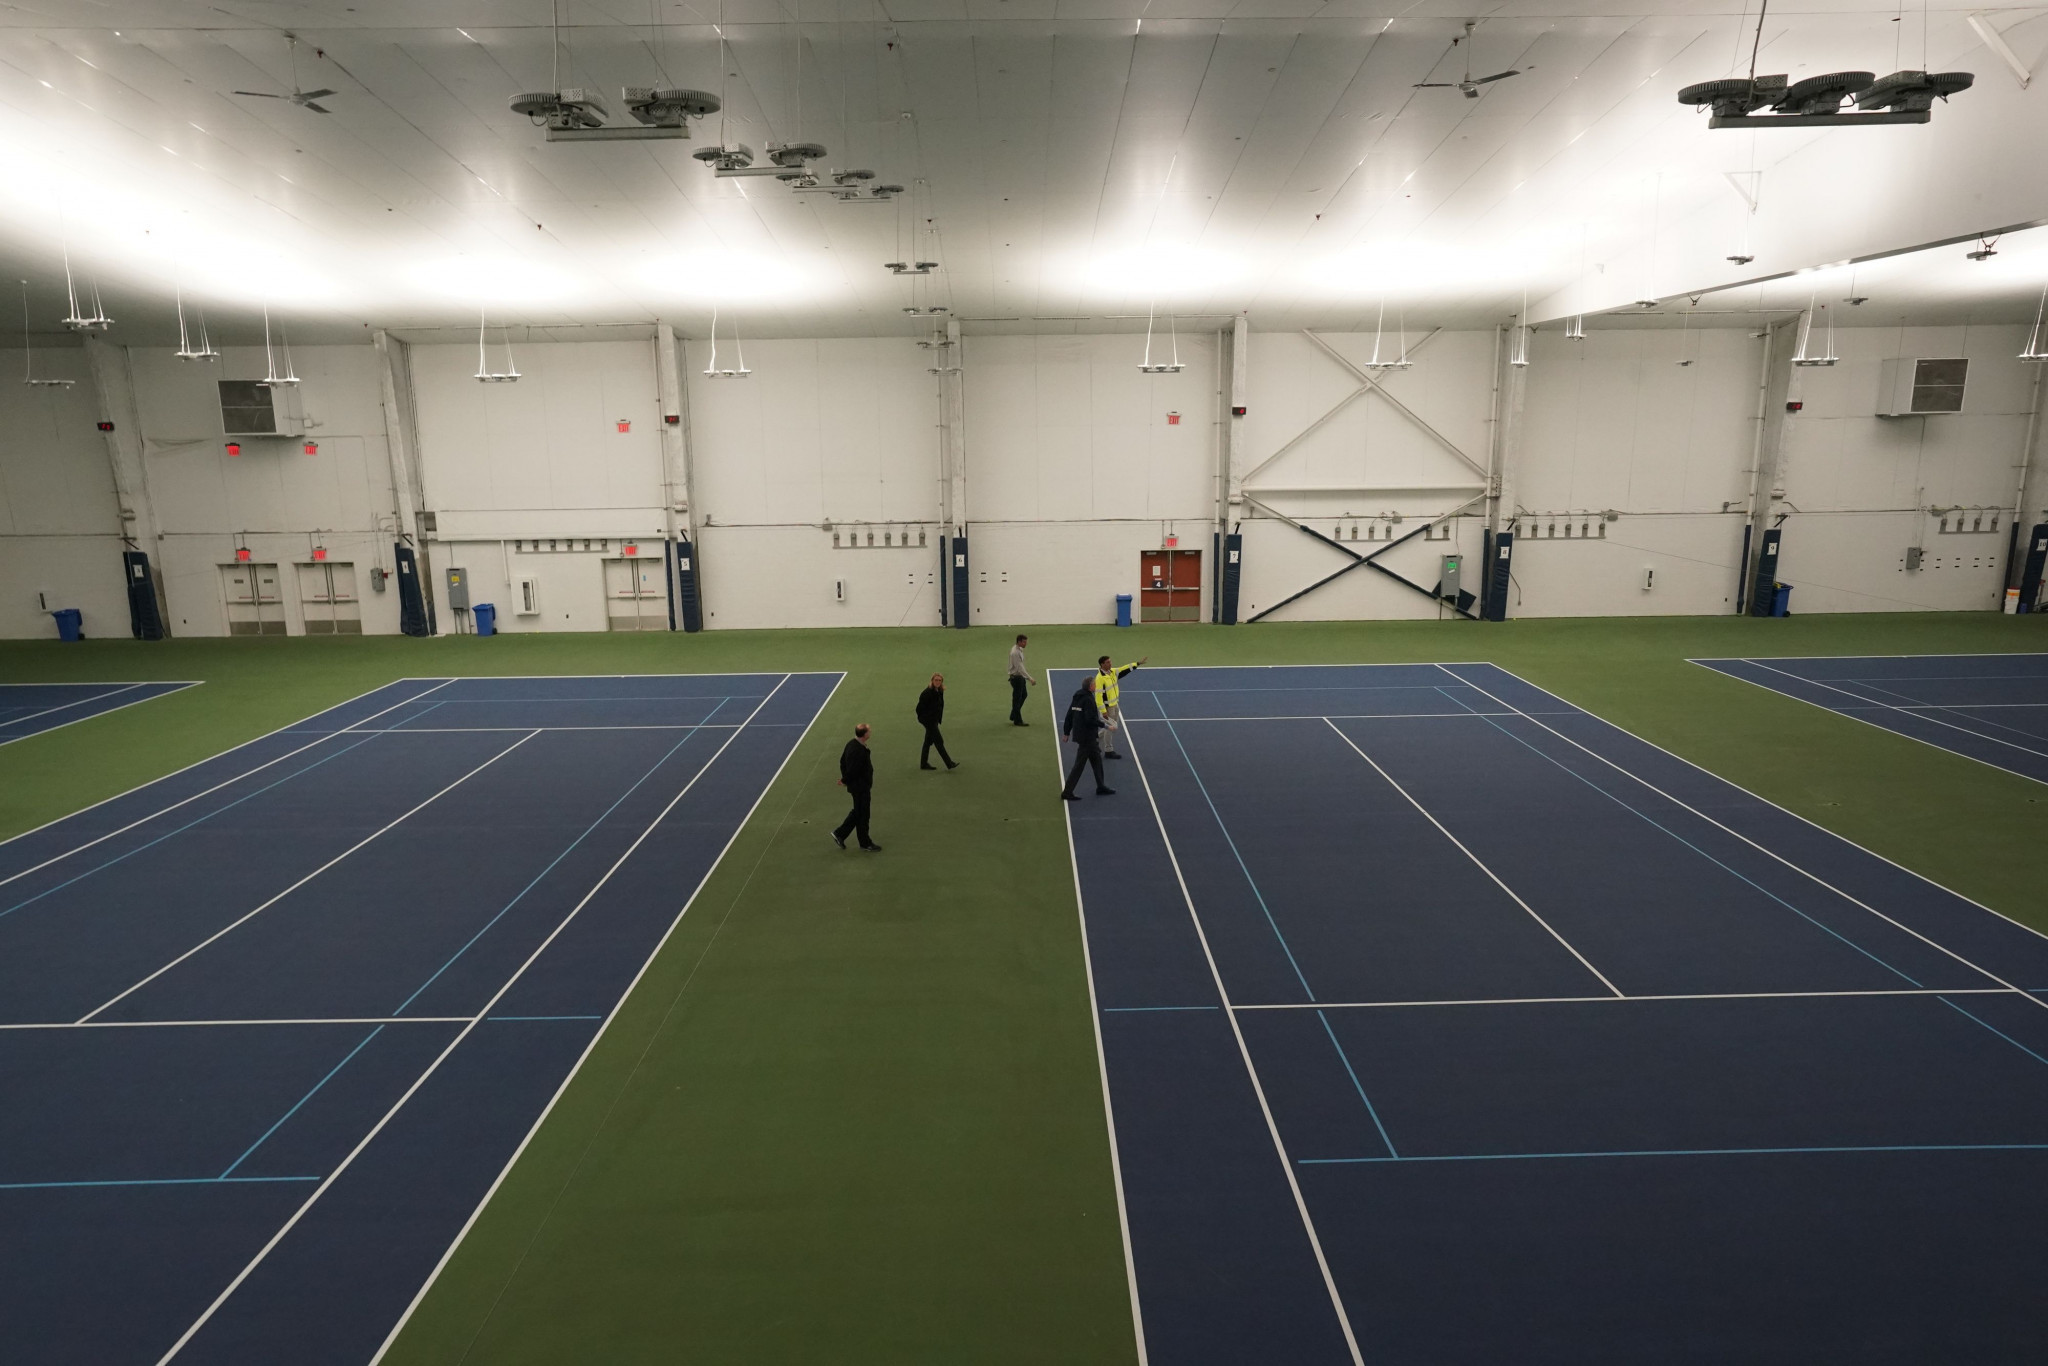 Twelve tennis courts at the facility’s Indoor Training Center were transformed into supplemental hospital space ©Getty Images